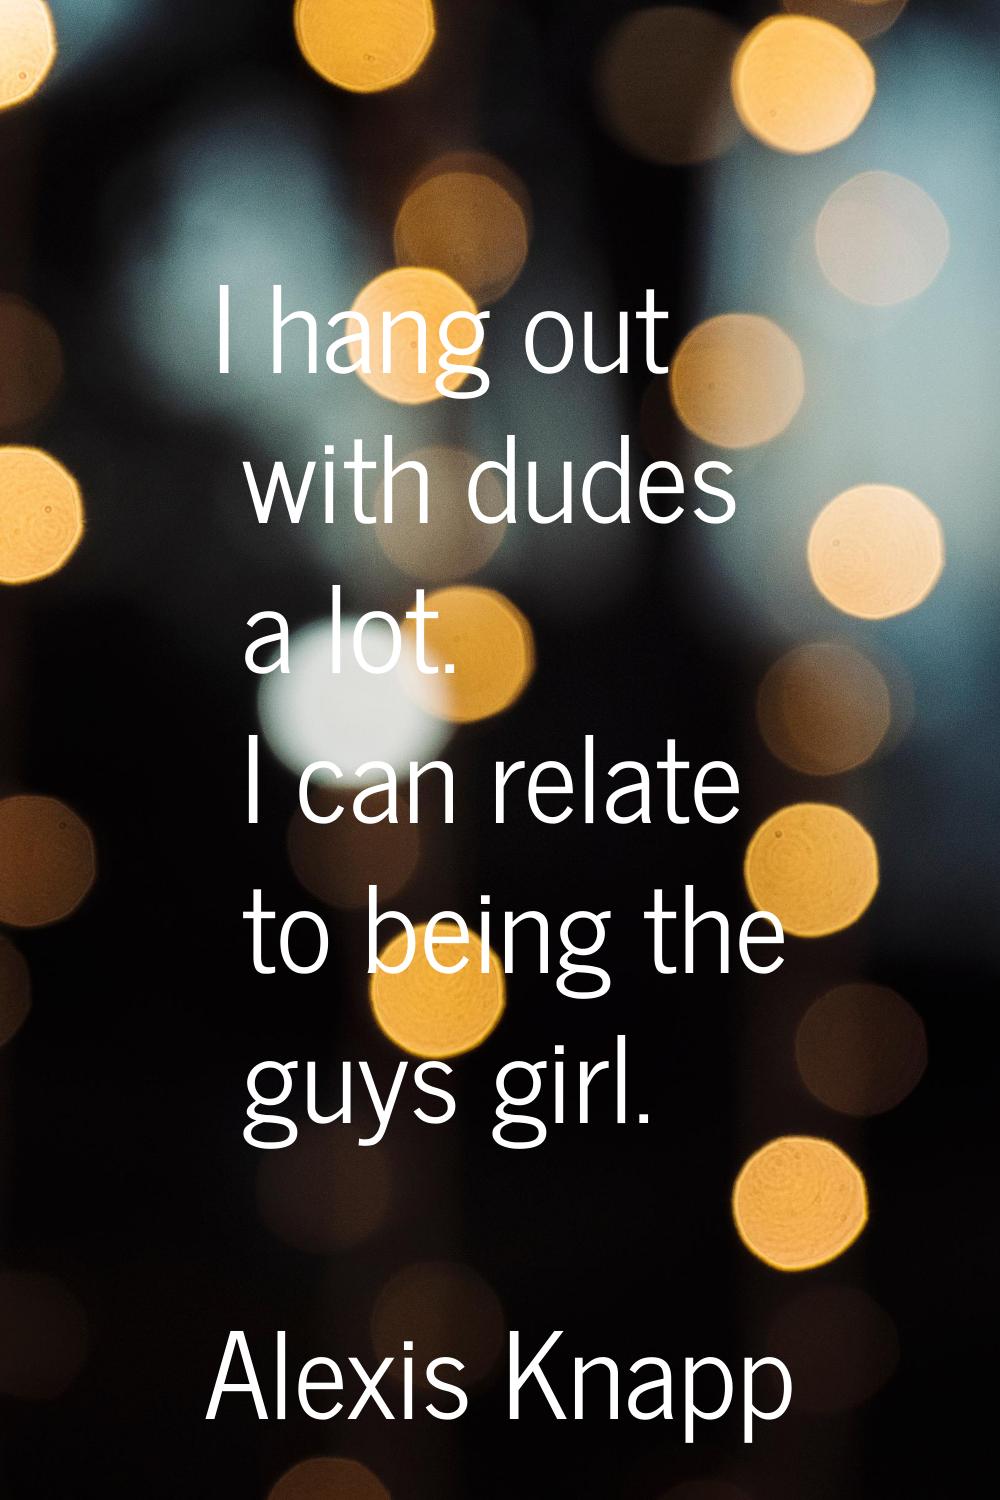 I hang out with dudes a lot. I can relate to being the guys girl.